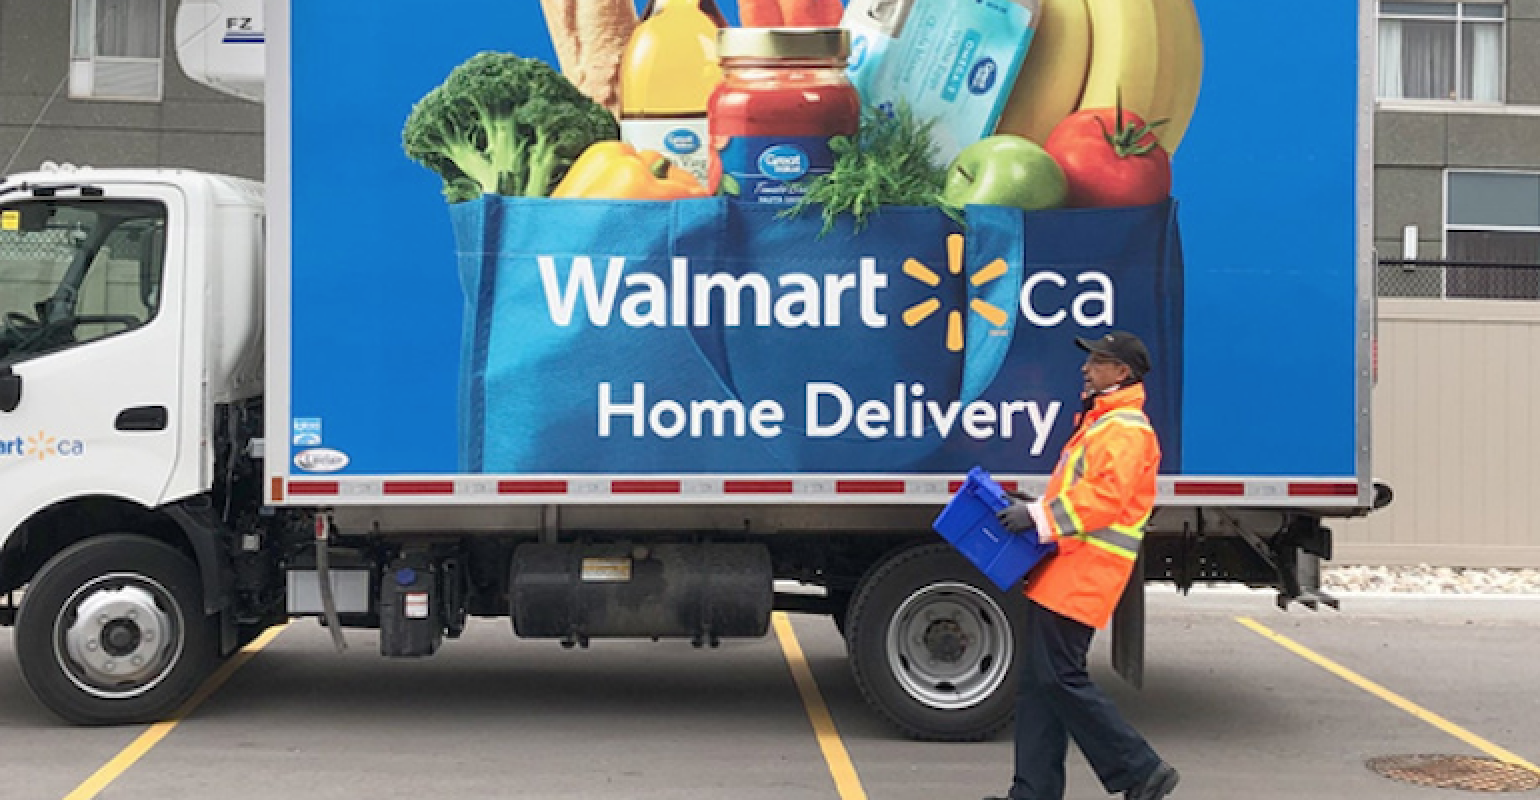 https://www.supermarketnews.com/sites/supermarketnews.com/files/styles/article_featured_retina/public/Walmart_Canada-carbon_neutral-last_mile_delivery-truck.png?itok=ys7LaD74